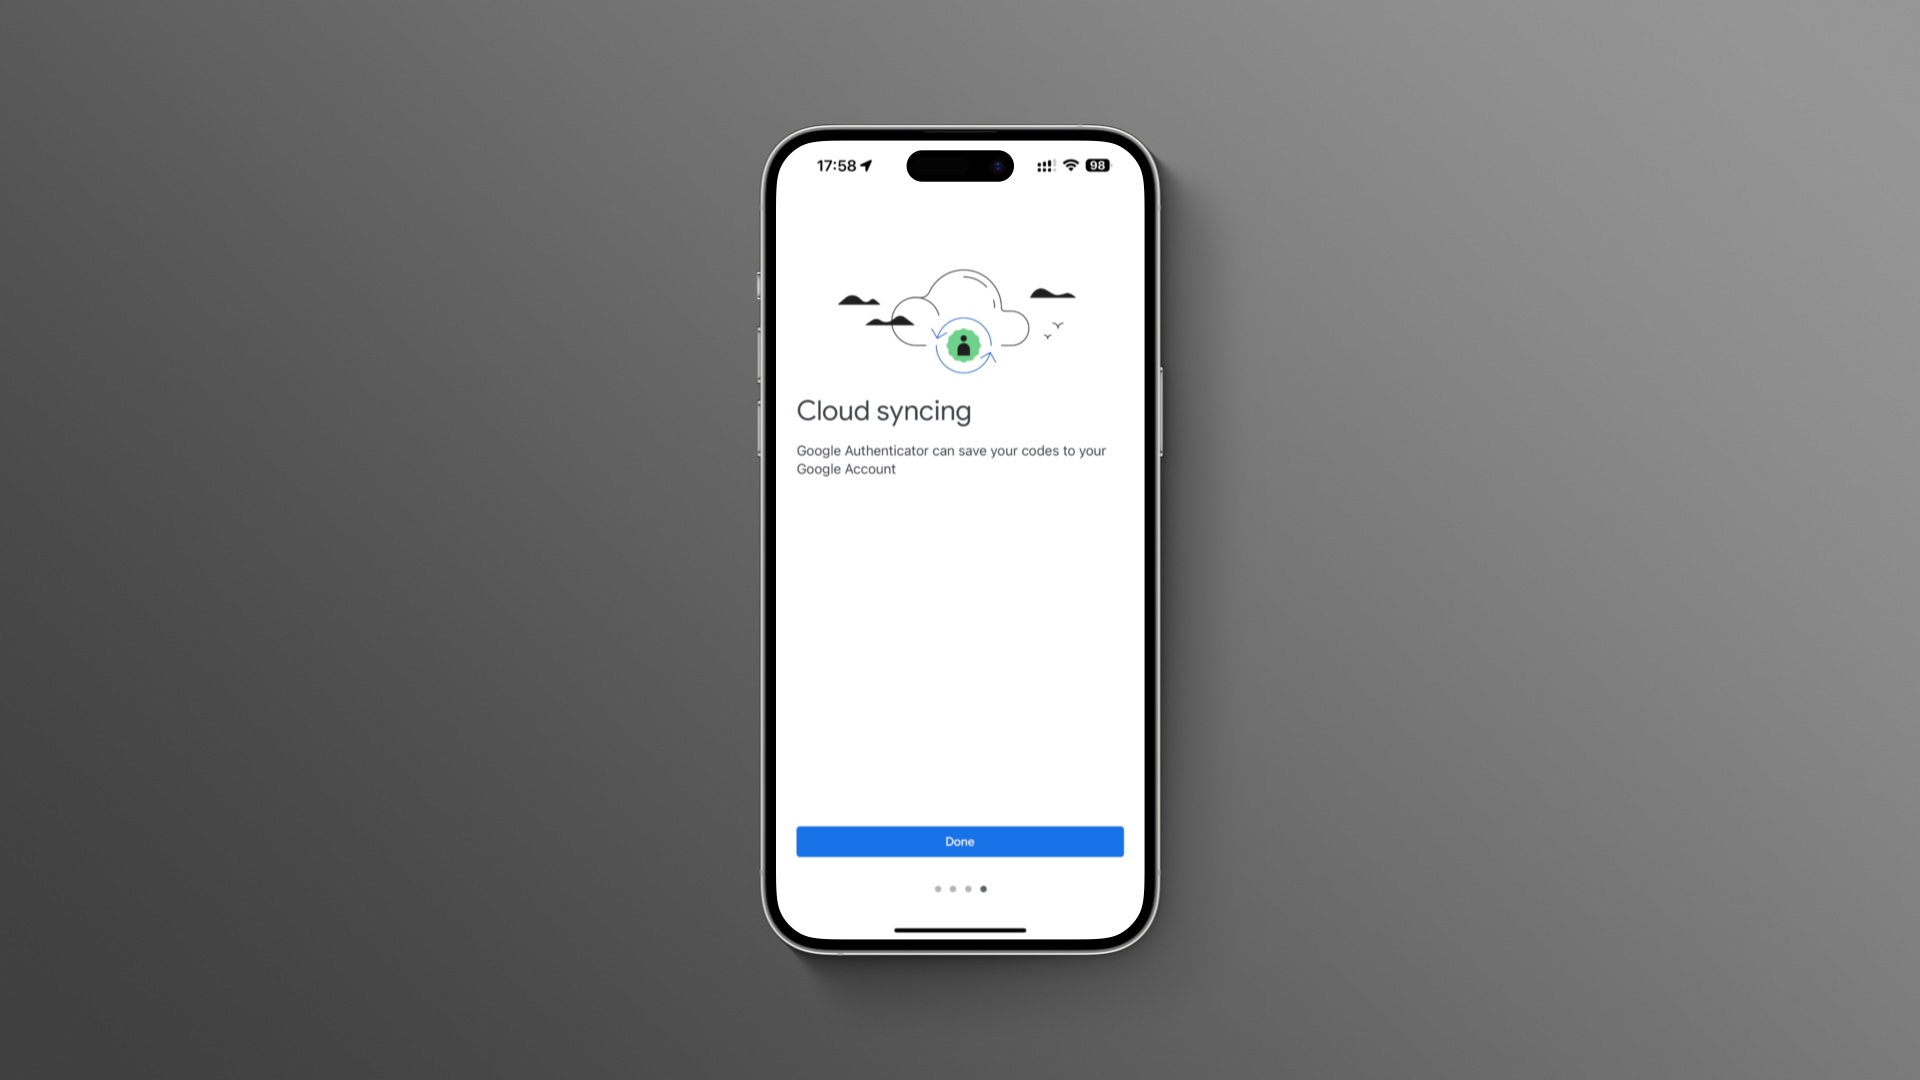 The cloud syncing prompt in Google Authenticator for iPhone